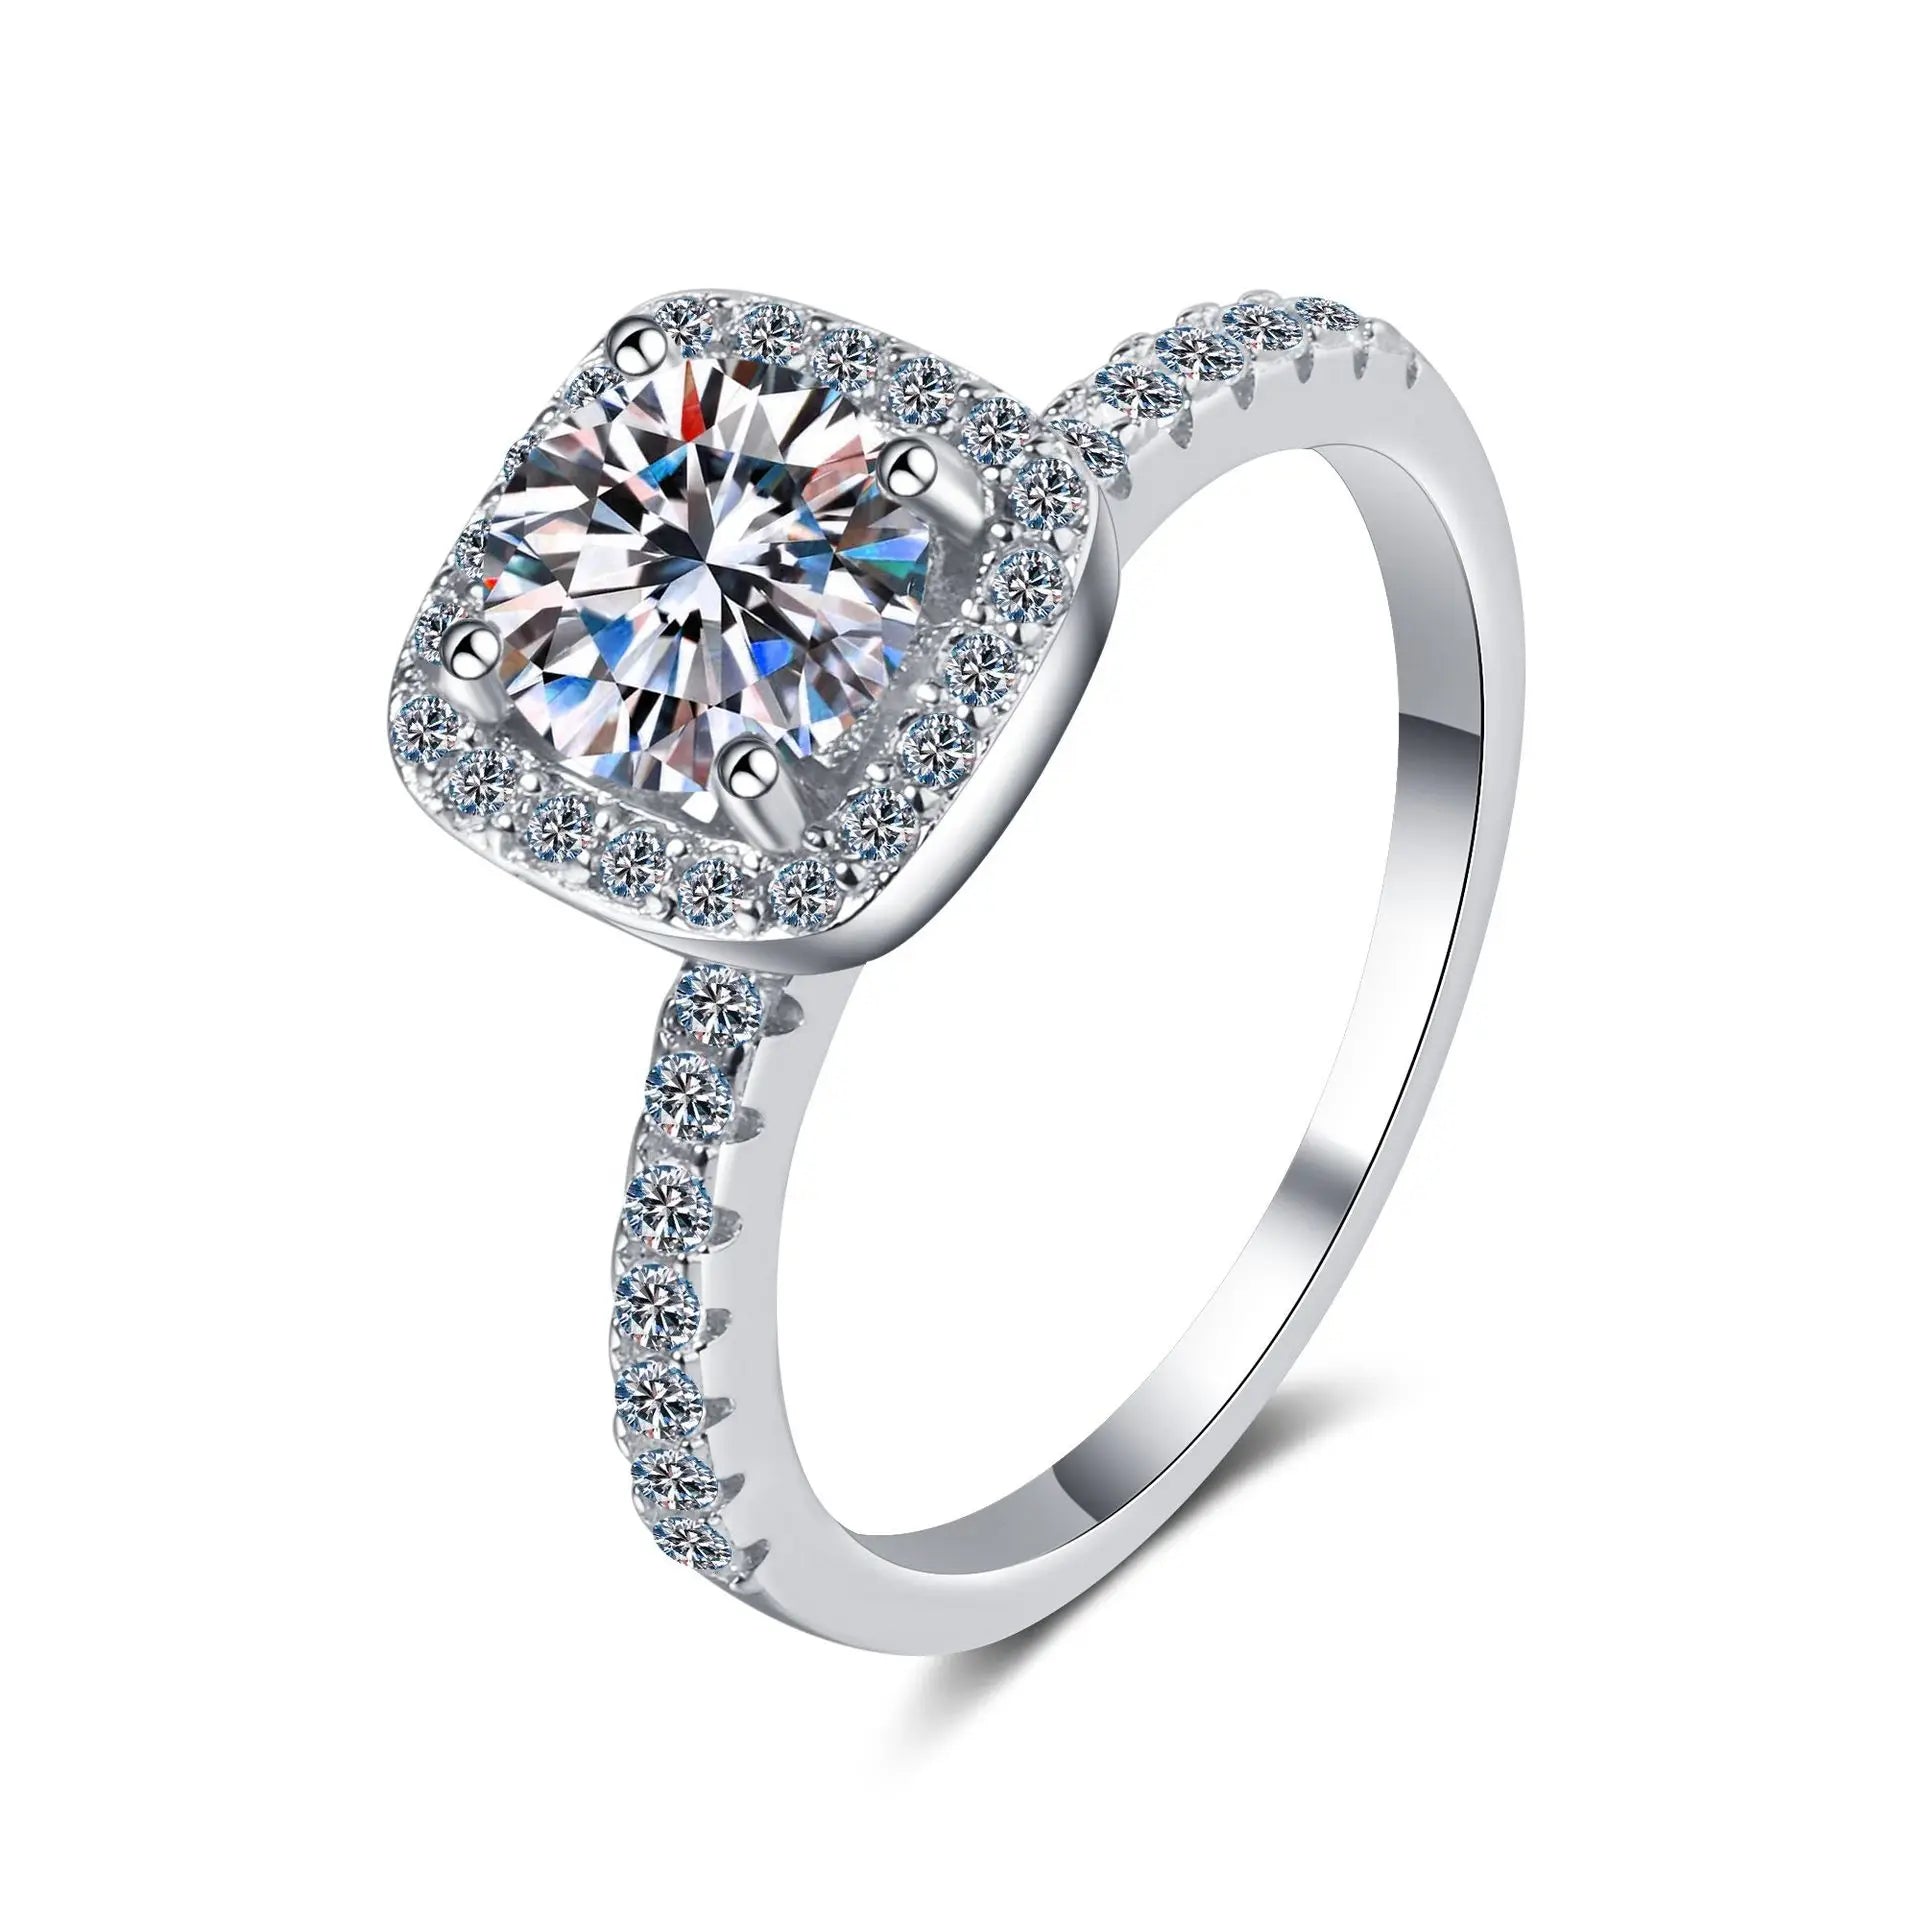 Cushion Cut Halo Moissanite Engagement Ring 0.5CT, 1CT, and 2CT - Vogue J'adore